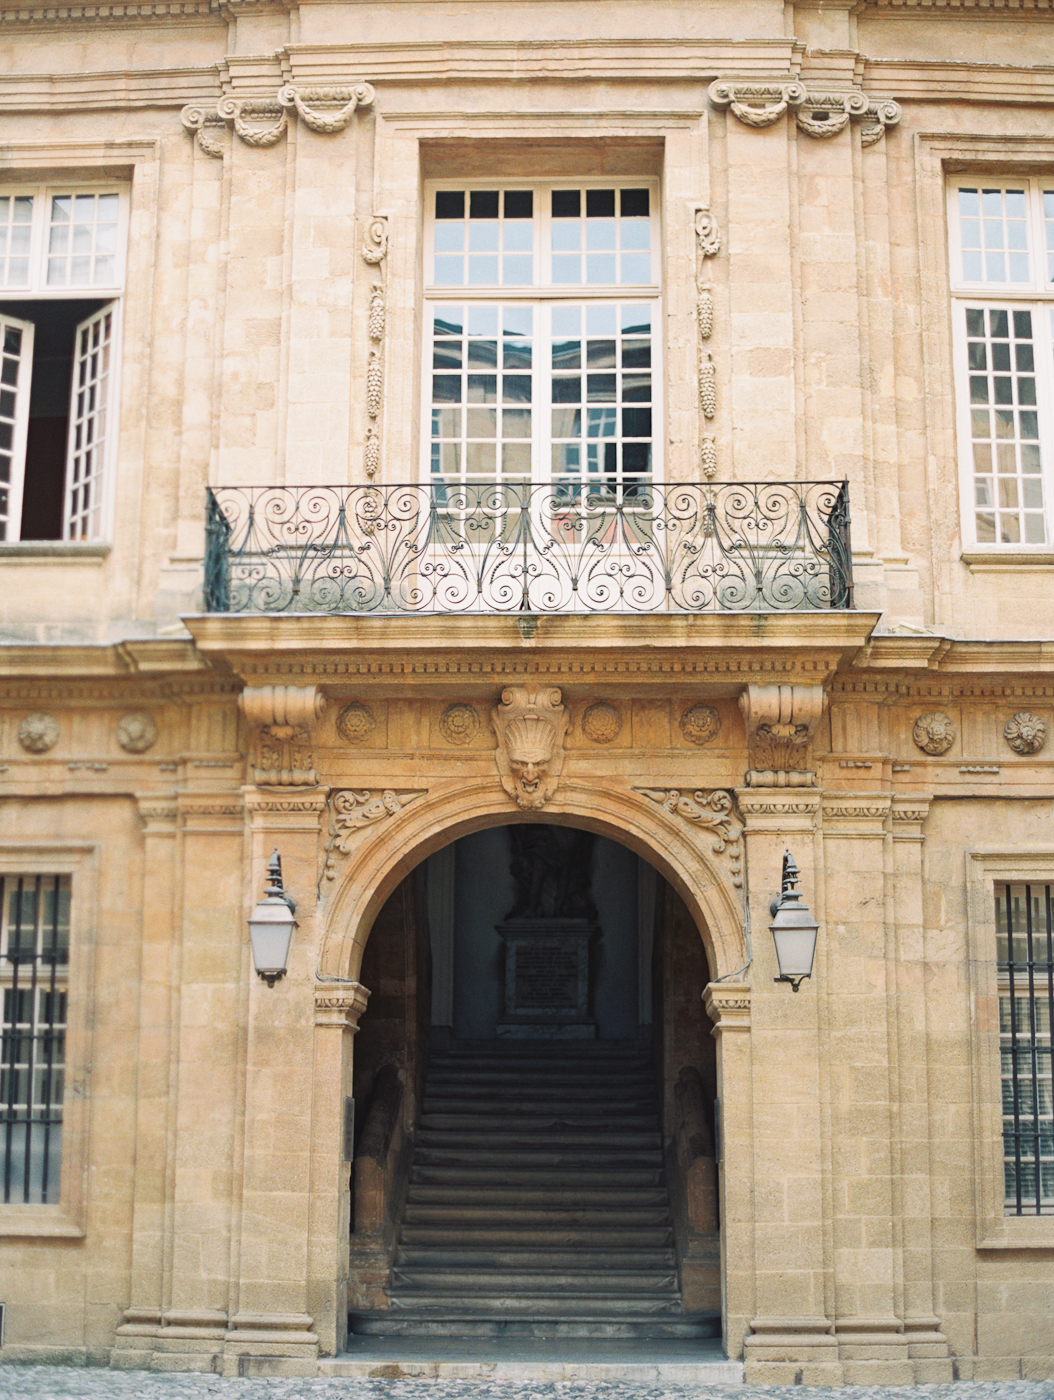 Entry Steps and Iron Balcony in Aix en Provence